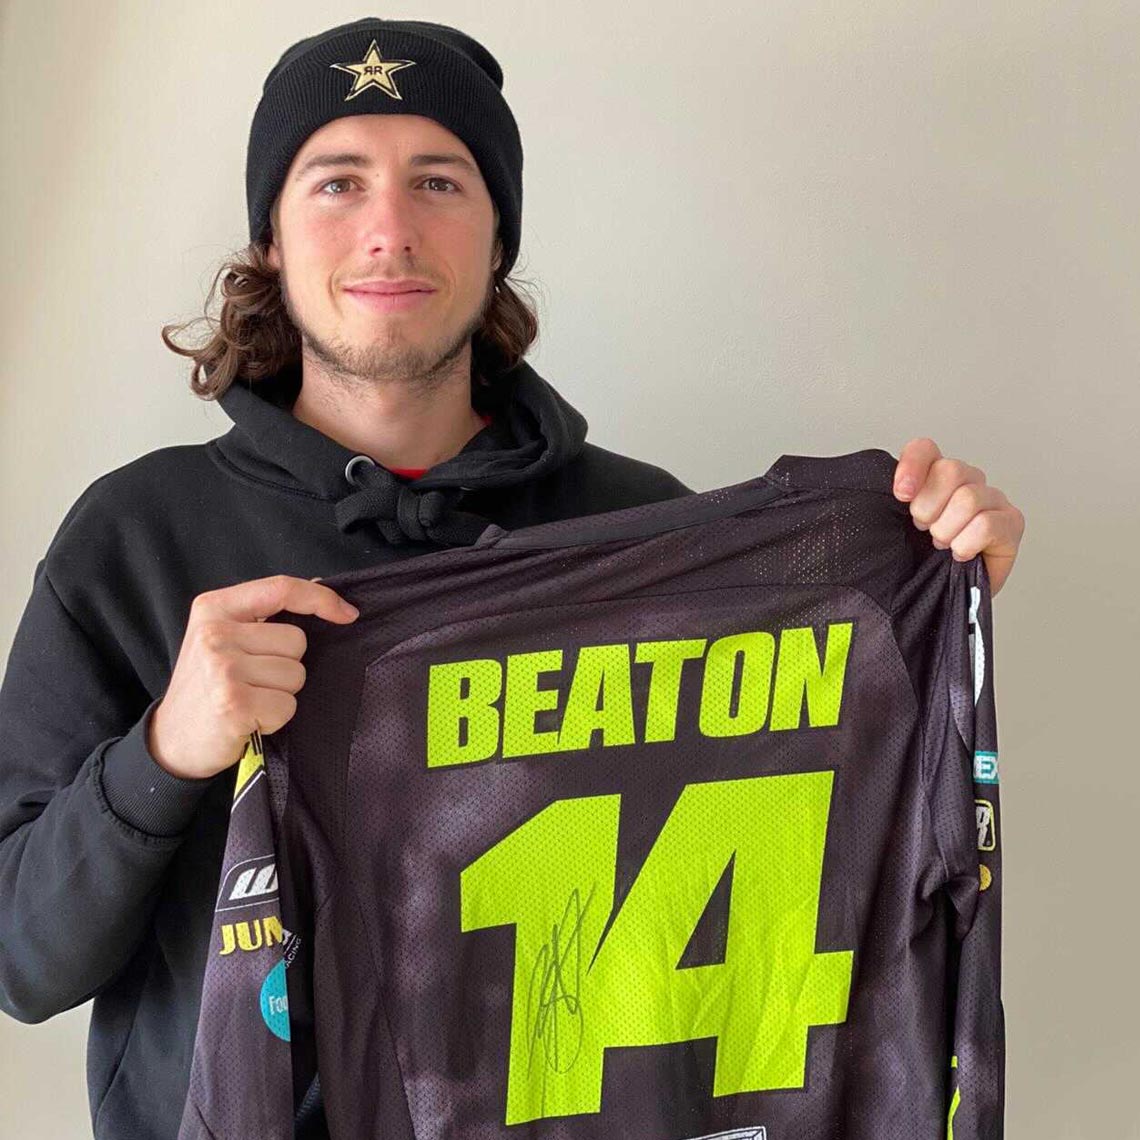 Jed Beaton Signed Jersey Giveaway